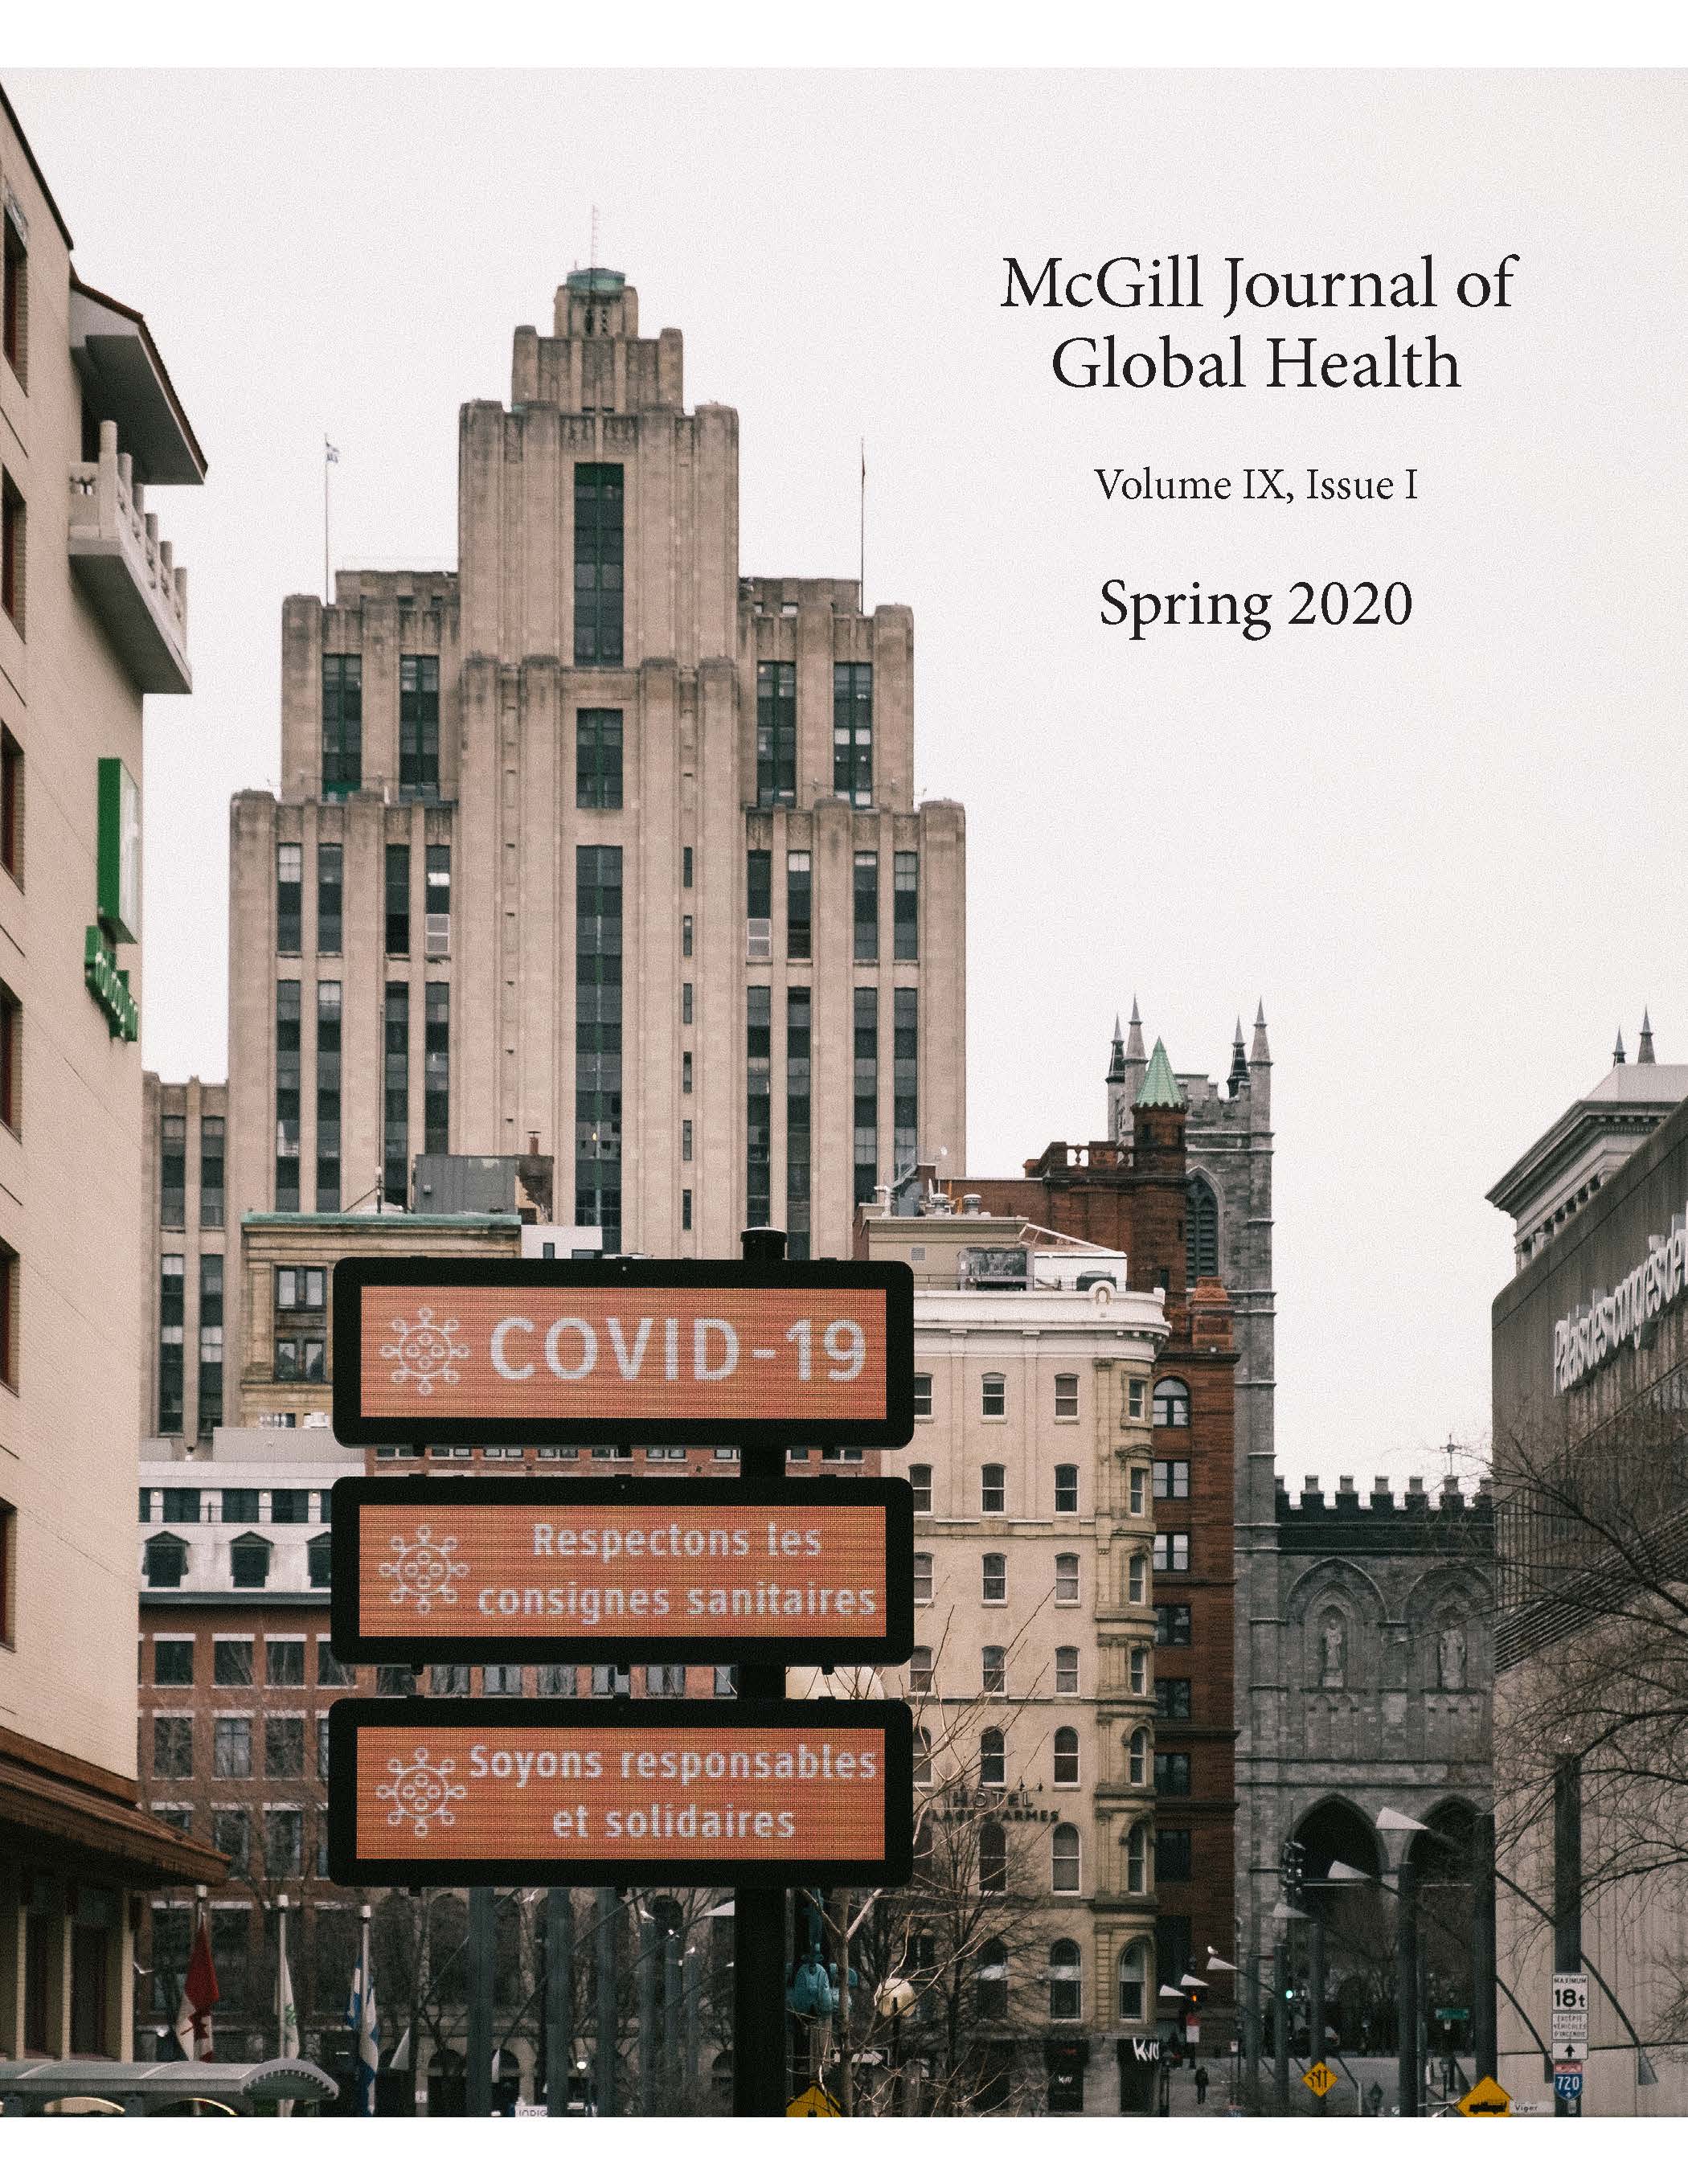 McGill Journal of Global Health Volume IX, issue 1 cover image (Montreal city landscape and covid-19 public announcements)